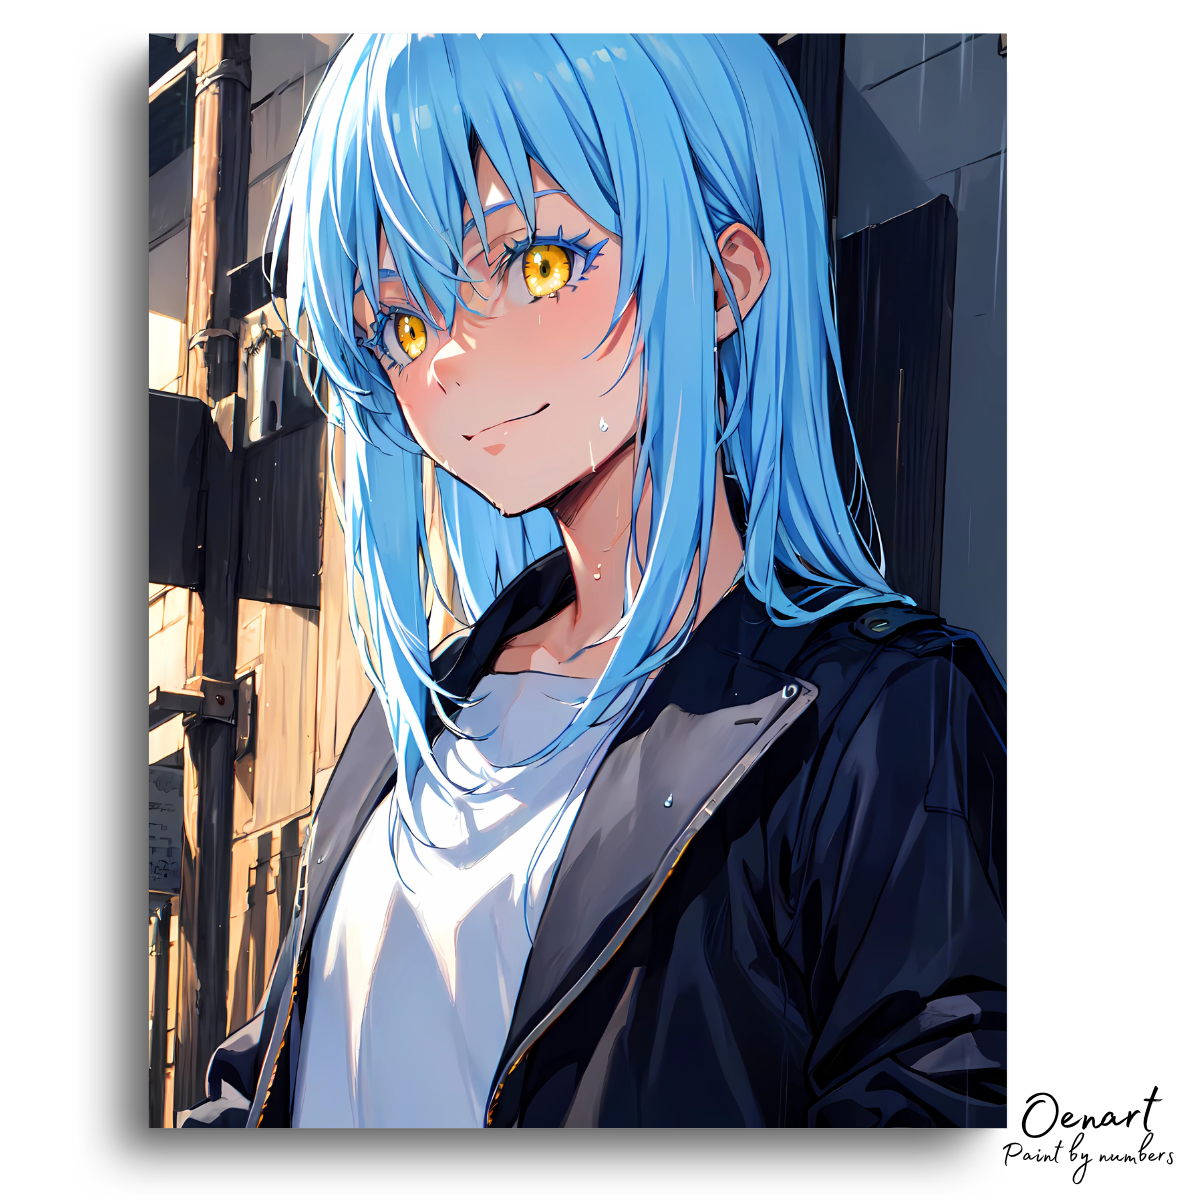 That Time I Got Reincarnated as a Slime: Rimuru Tempest - Anime Painting Set